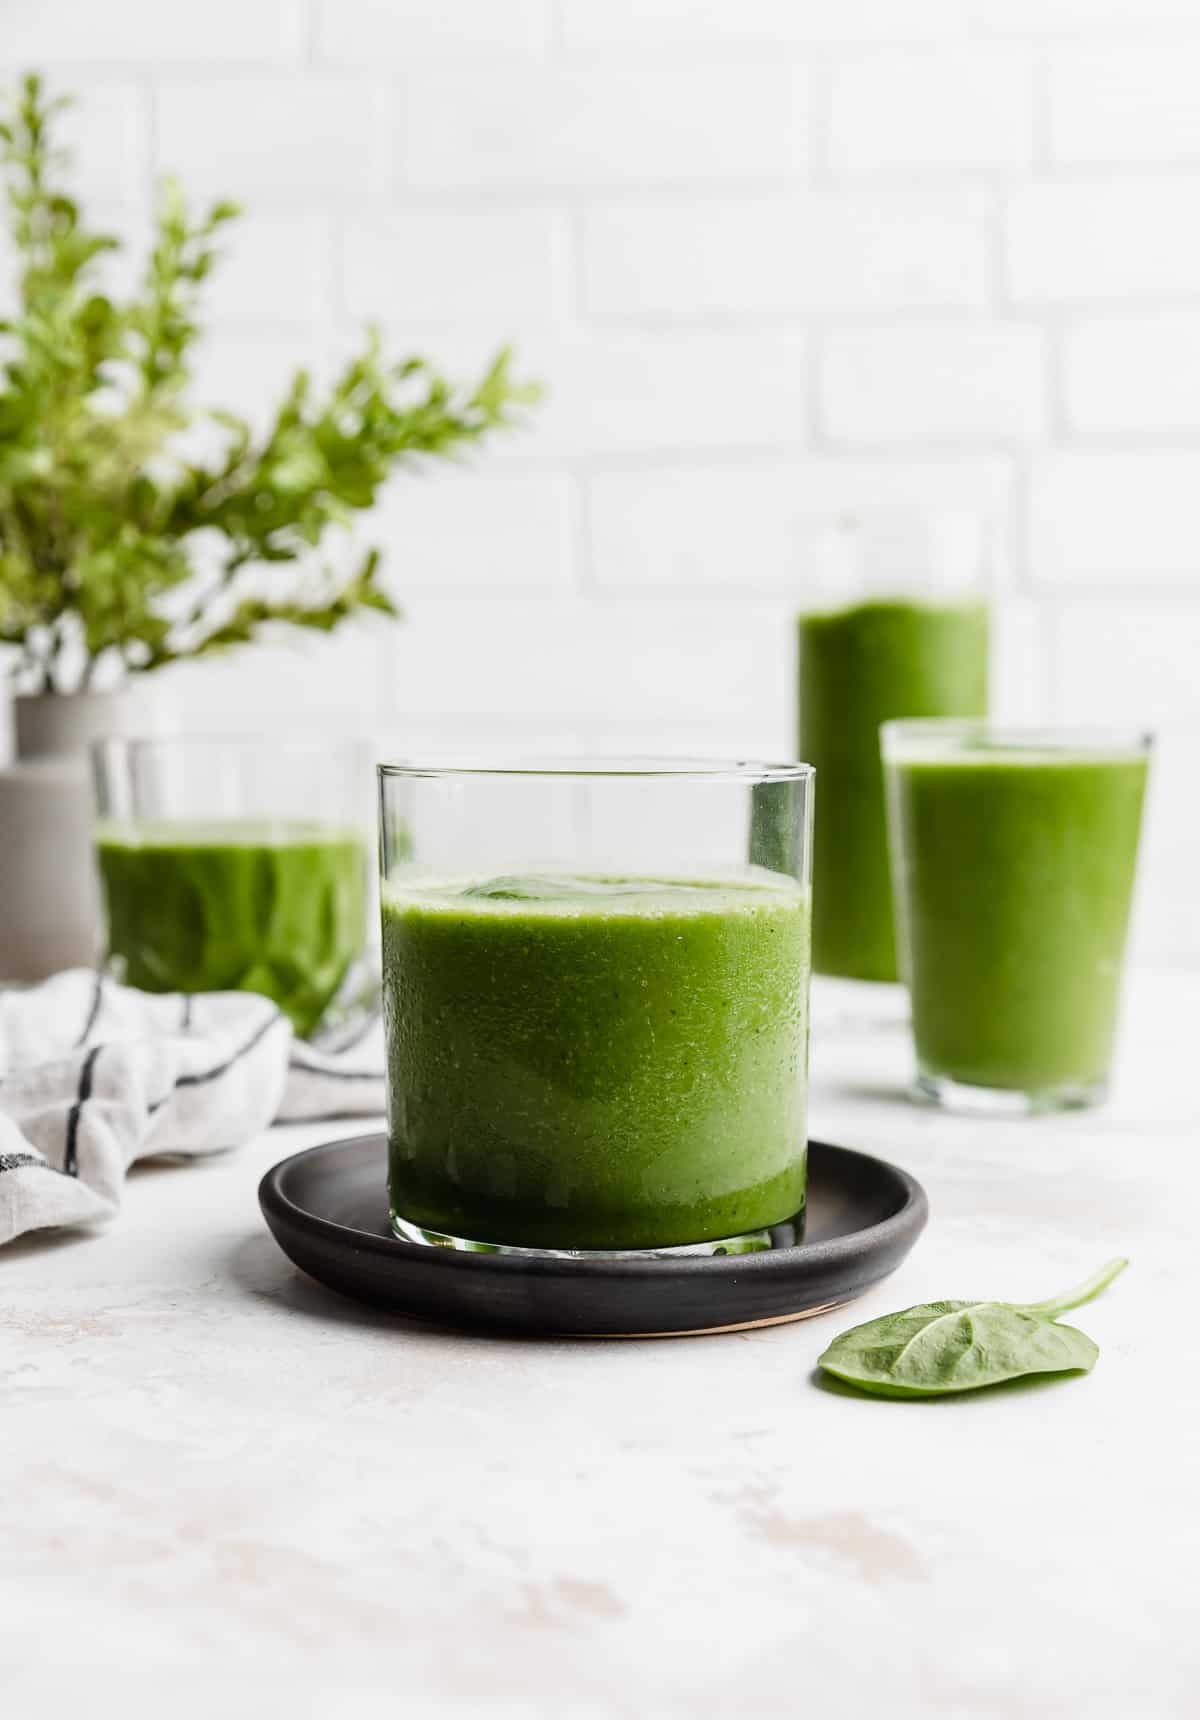 A small clear glass filled with dark green Pineapple Spinach Smoothie against a white brick background.